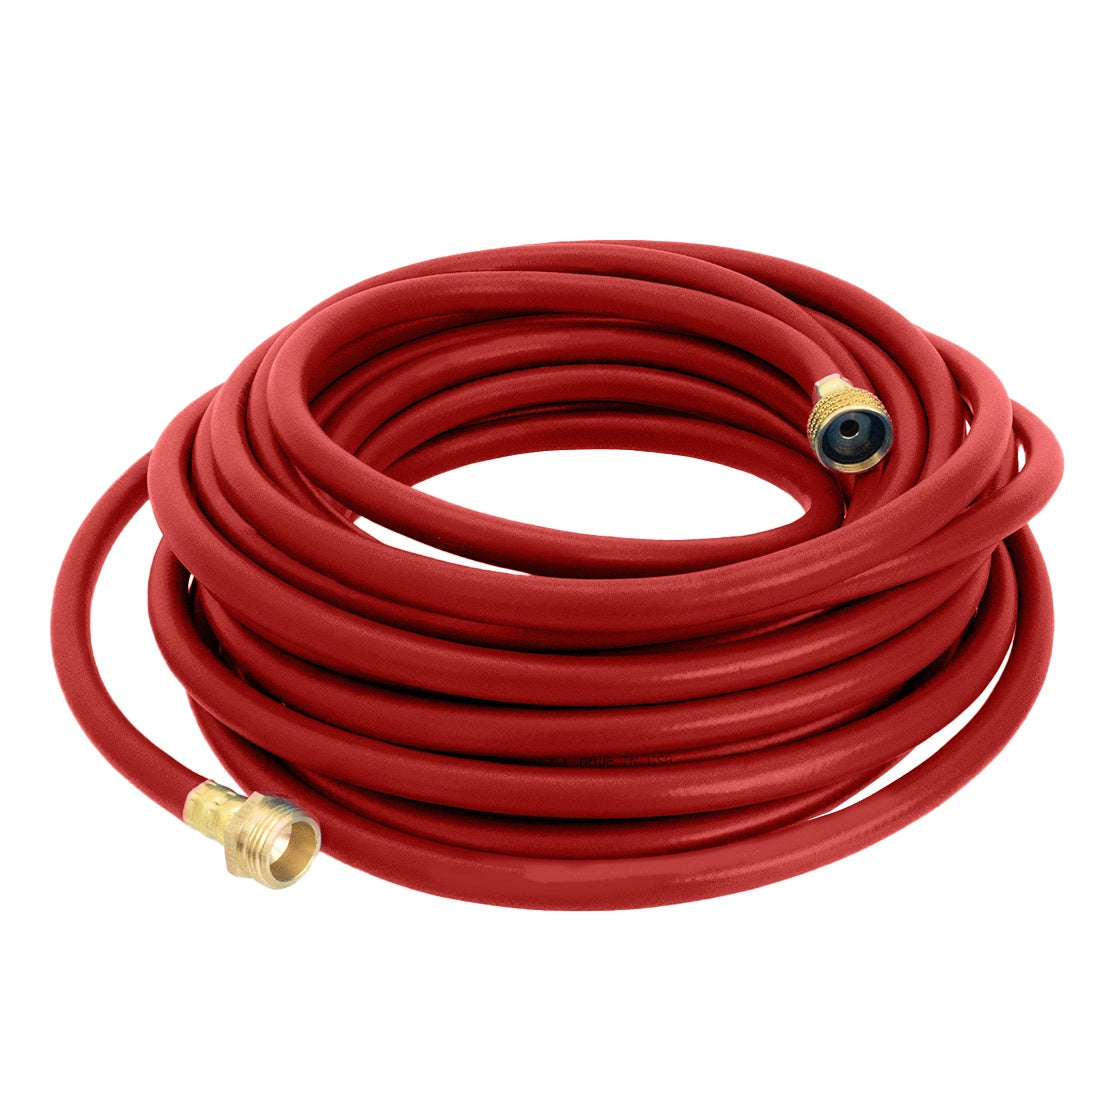 XERO Rubber Hose - 3/8 Inch Red Front View